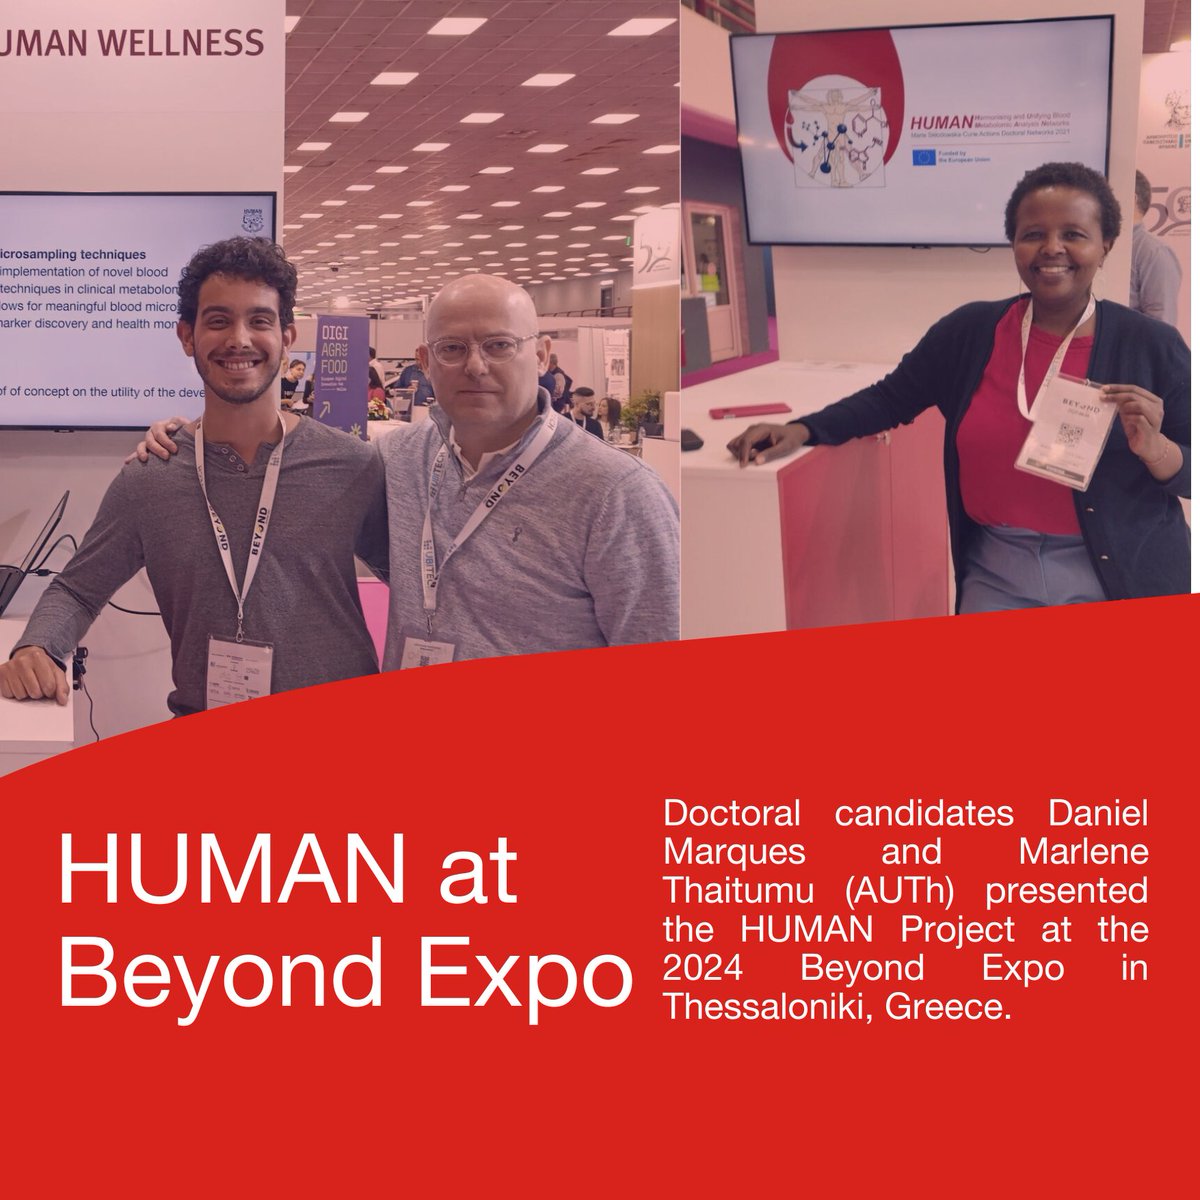 Spotted👀 at the Beyond Expo 2024! ✨DCs Daniel Marques (left) and Marlene Thaitumu (right) of AUTh presented the HUMAN Project at the 2024 Beyond Expo in Thessaloniki, 🇬🇷! They were accompanied by BiOMIC postdoc Petros Pousinis (center). #metabolomics #health #massspec